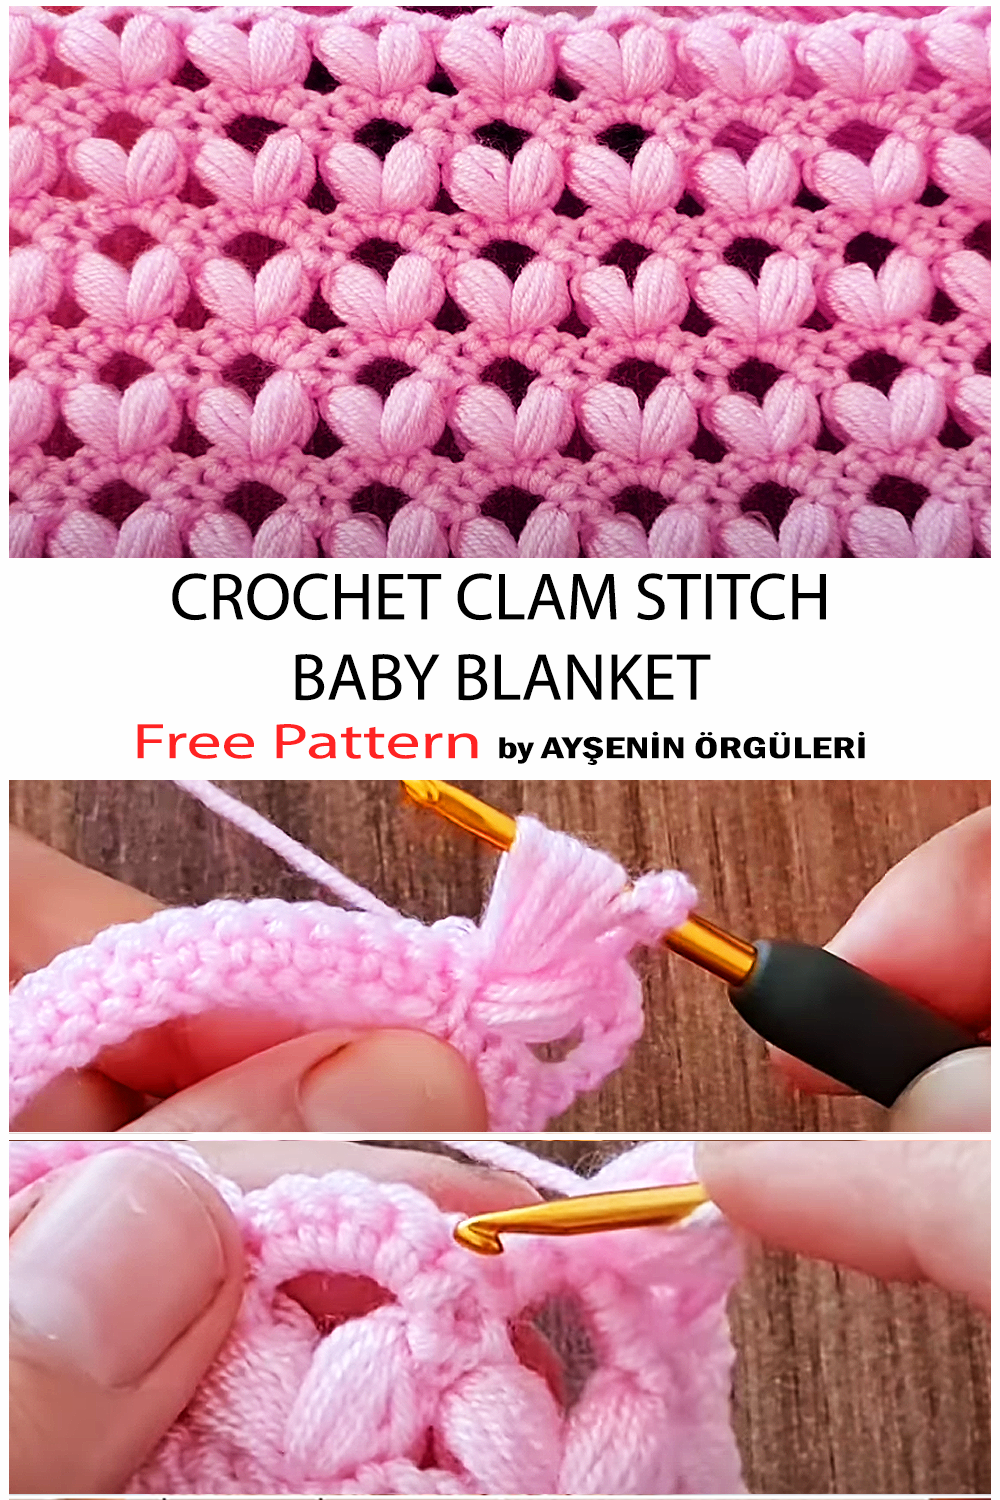 How To Crochet Clam Stitch - Free Pattern For Beginners